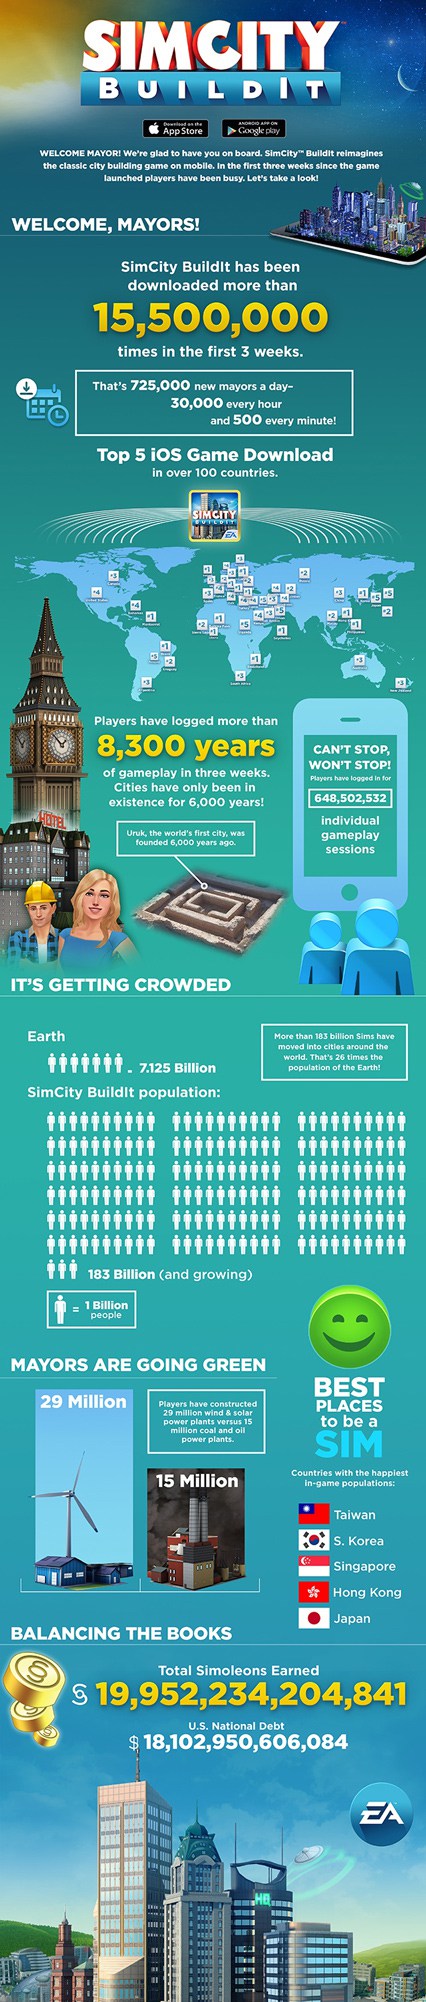 SimCity BuildIt Infographic